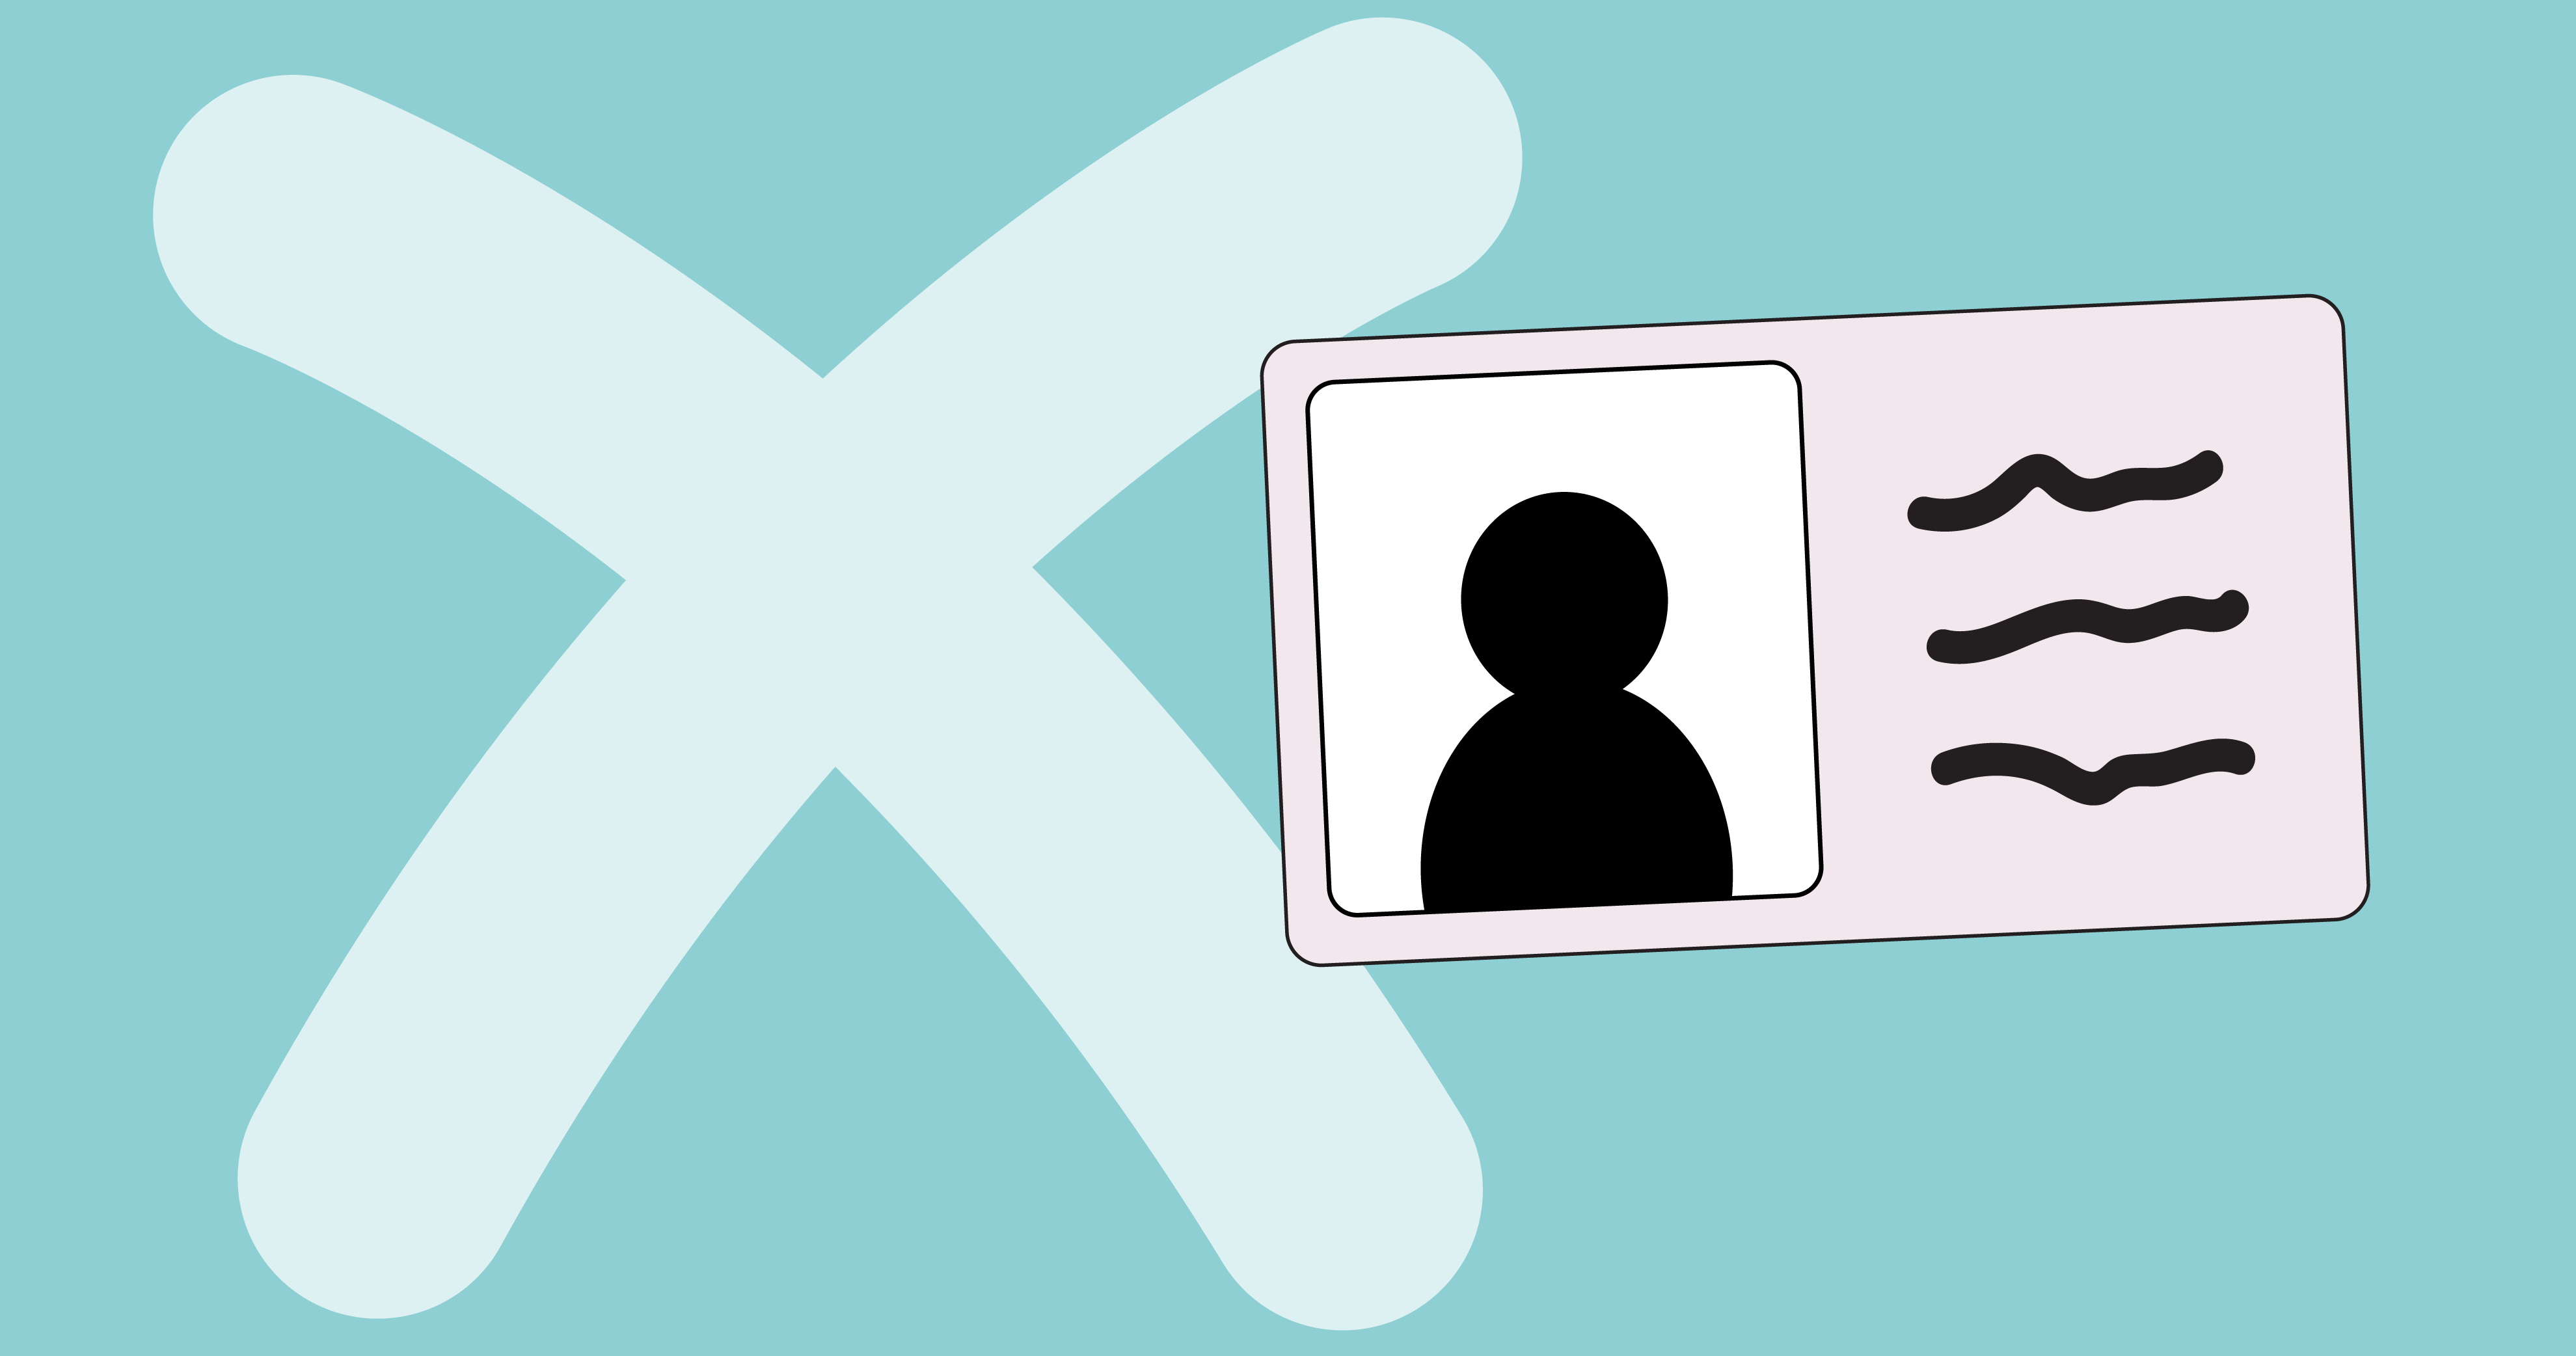 Voting X with ID illustration